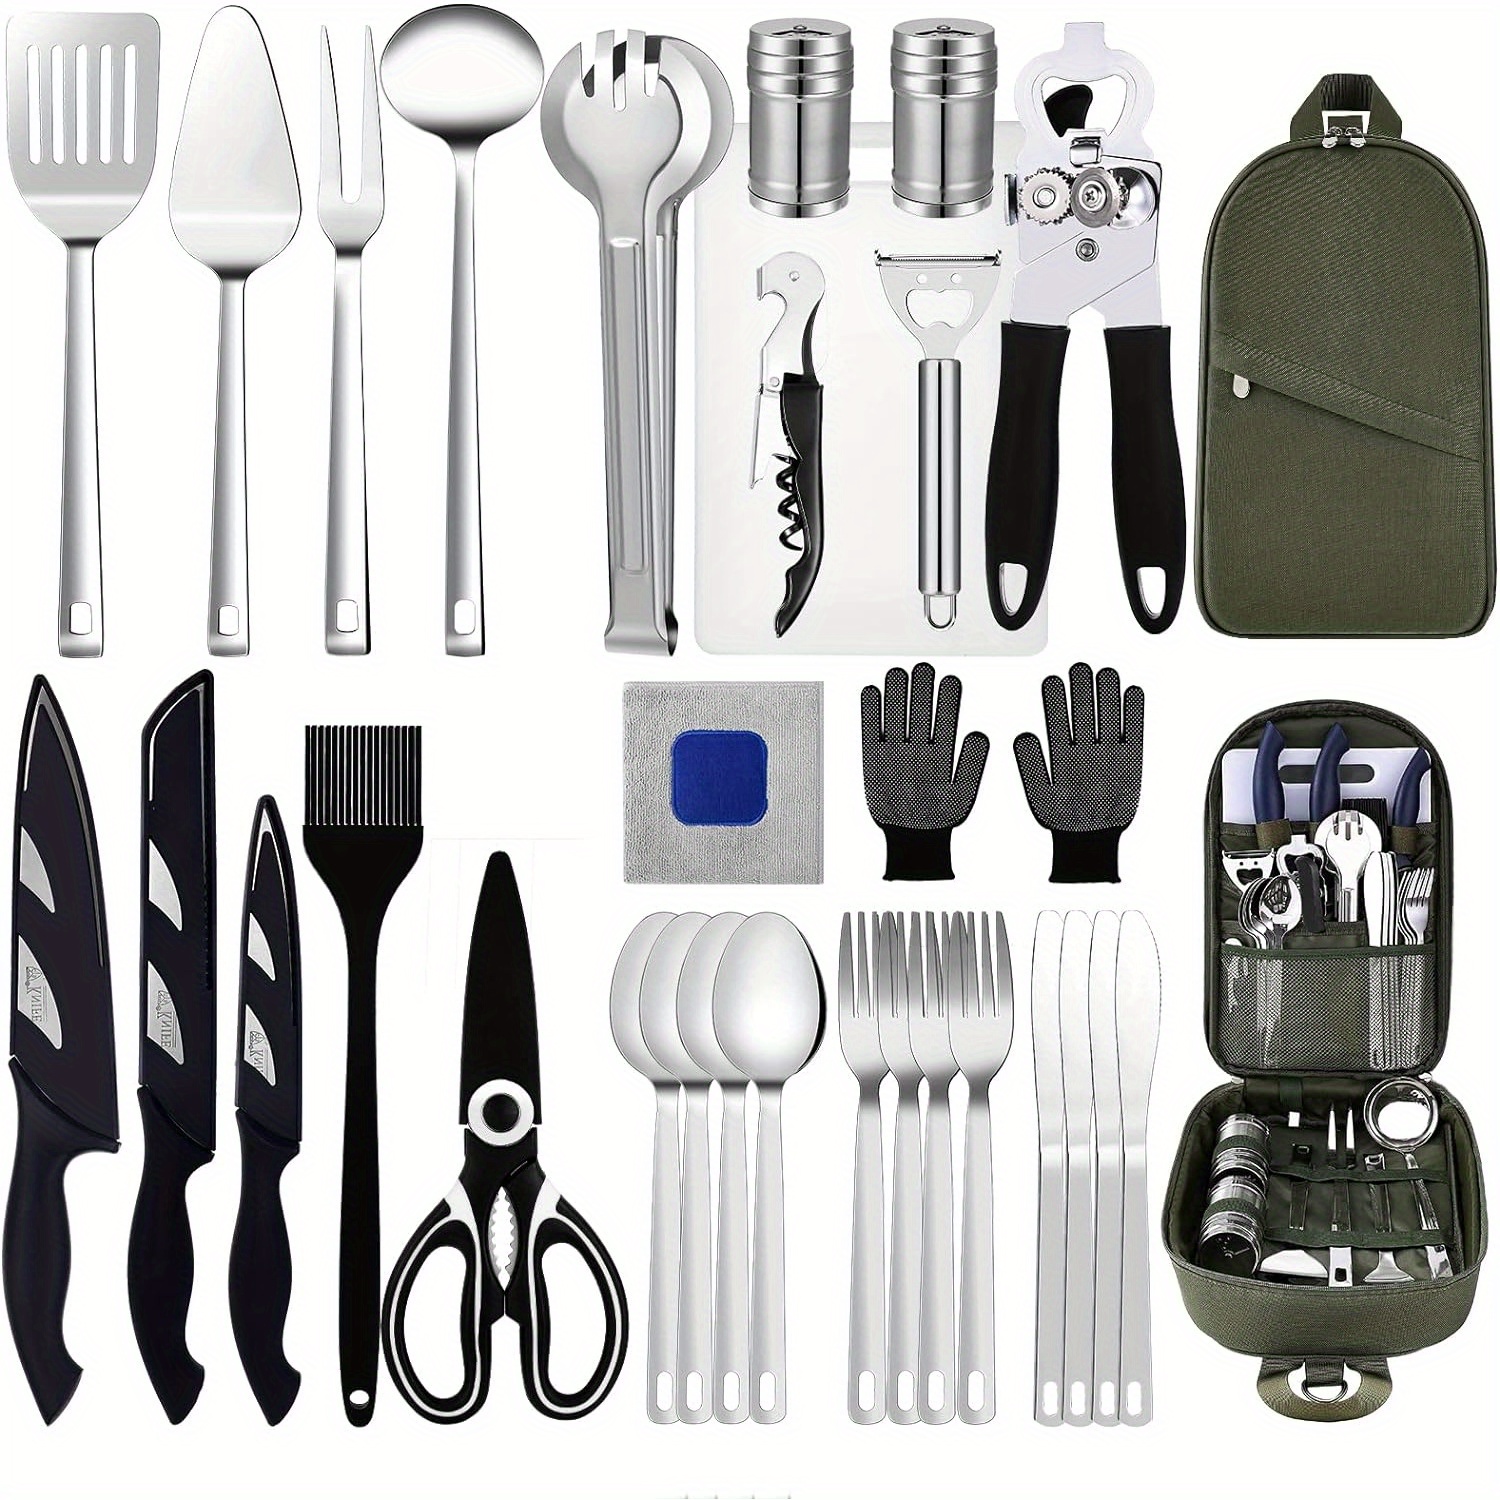 

Camping Essentials Camping Accessories Gear Must Haves Camper Tent Camping Kitchen Rv Cooking Set Camping Cooking Utensils Set Supplies Gadgets Outdoor Stove Portable Picnic Gifts Bbq Stuff